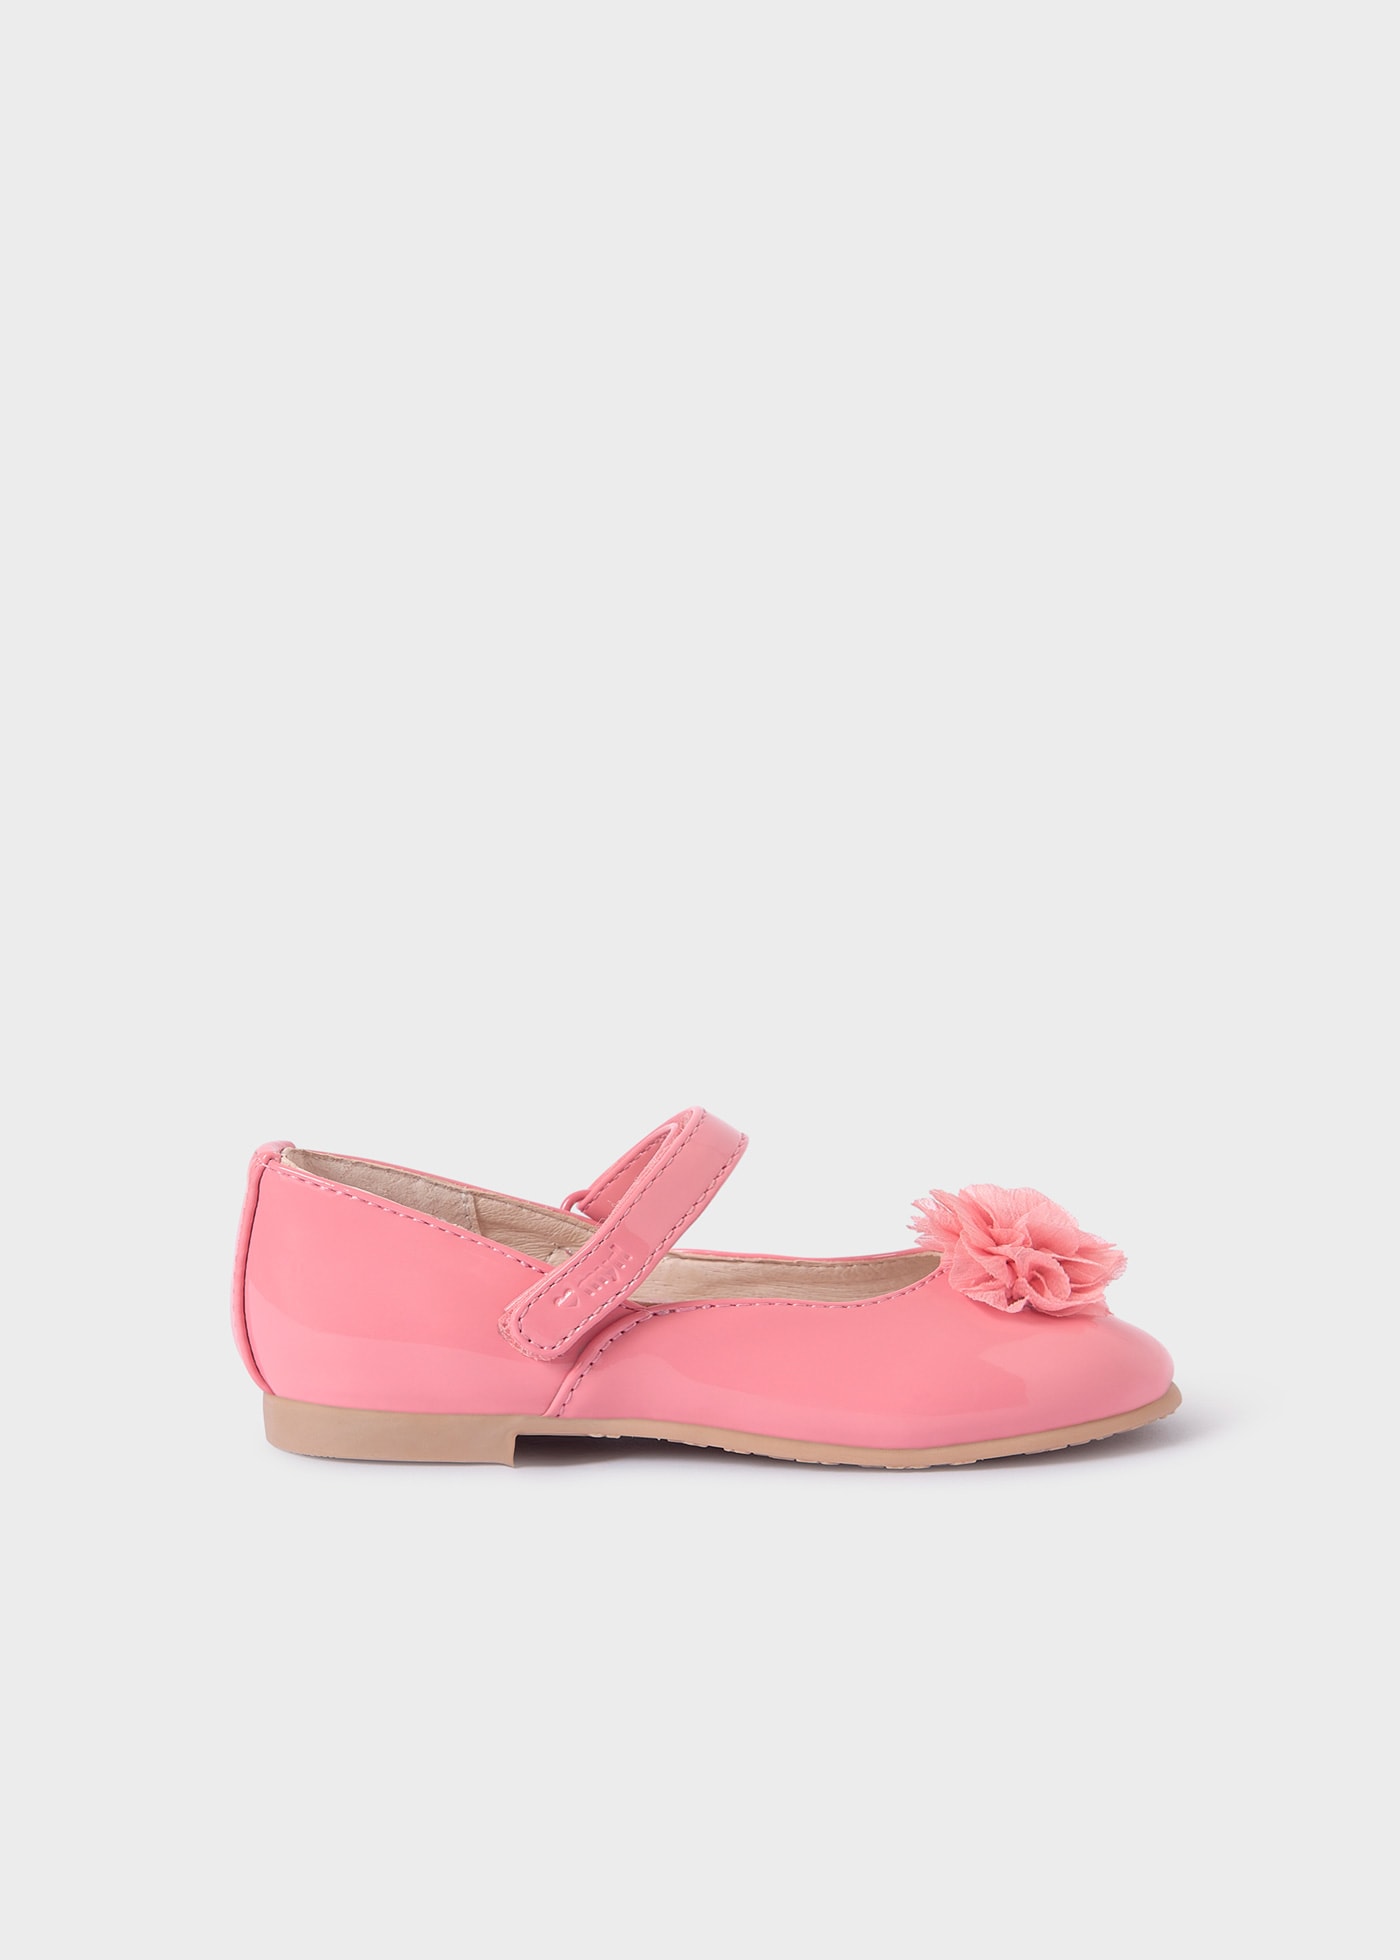 Girls patent leather mary jane sustainable leather